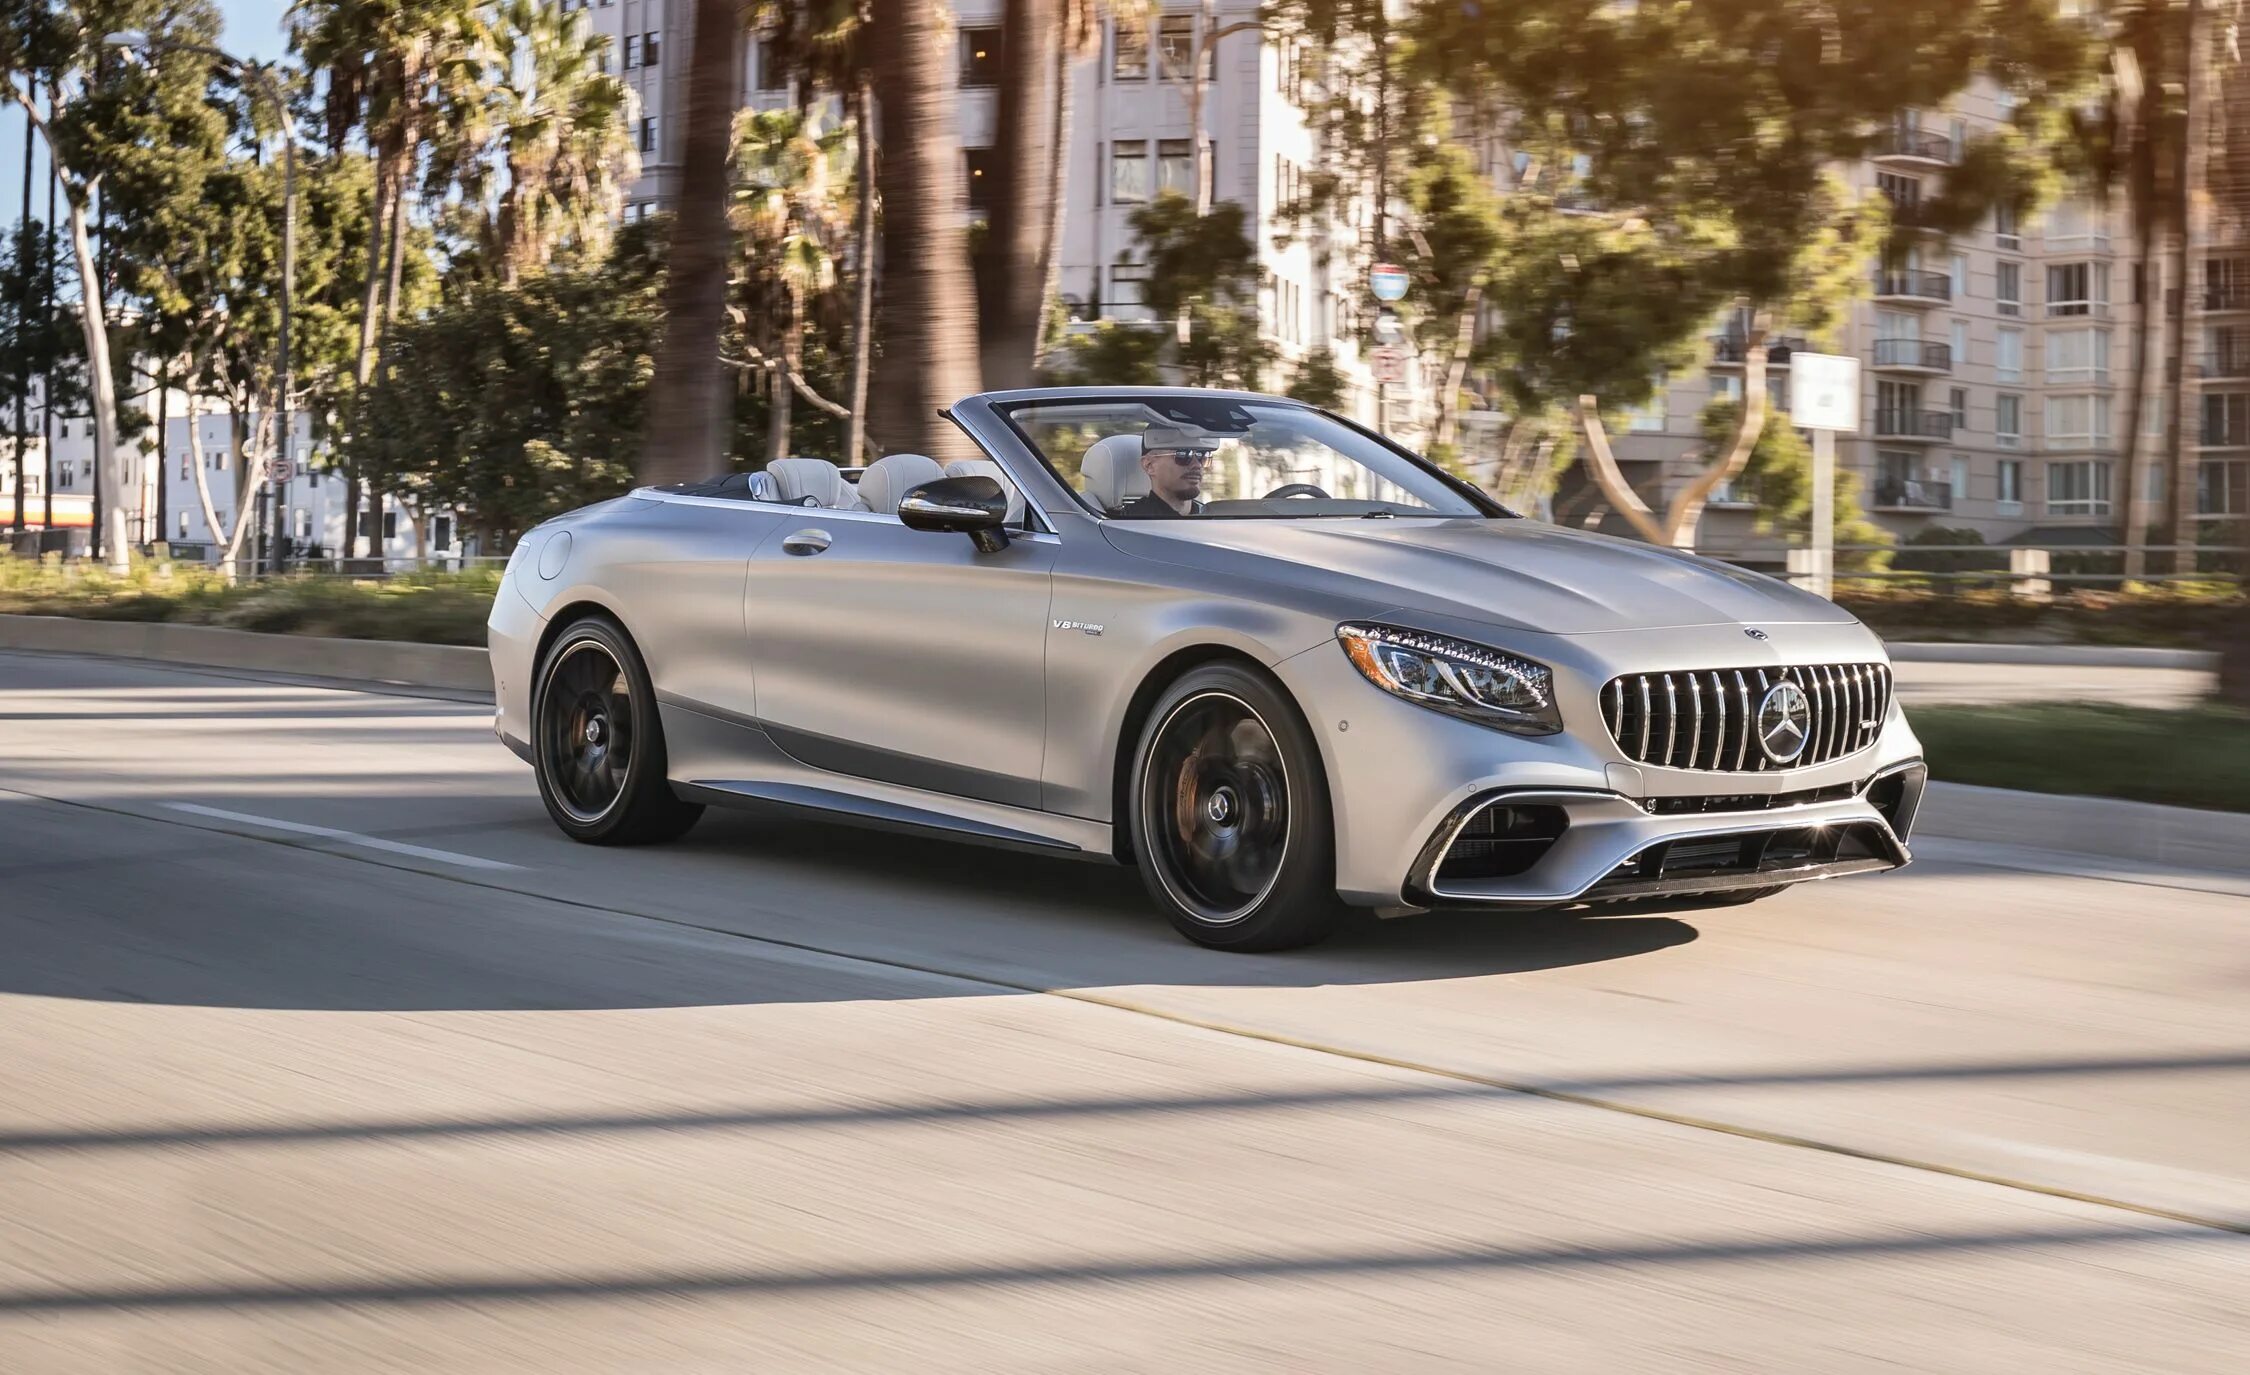 Mercedes coupe 2024. Mercedes AMG s63 Cabriolet. Mercedes s63 AMG Coupe Cabriolet. Mercedes s63 Coupe Cabrio. Mercedes Benz s63 AMG Coupe 2018.